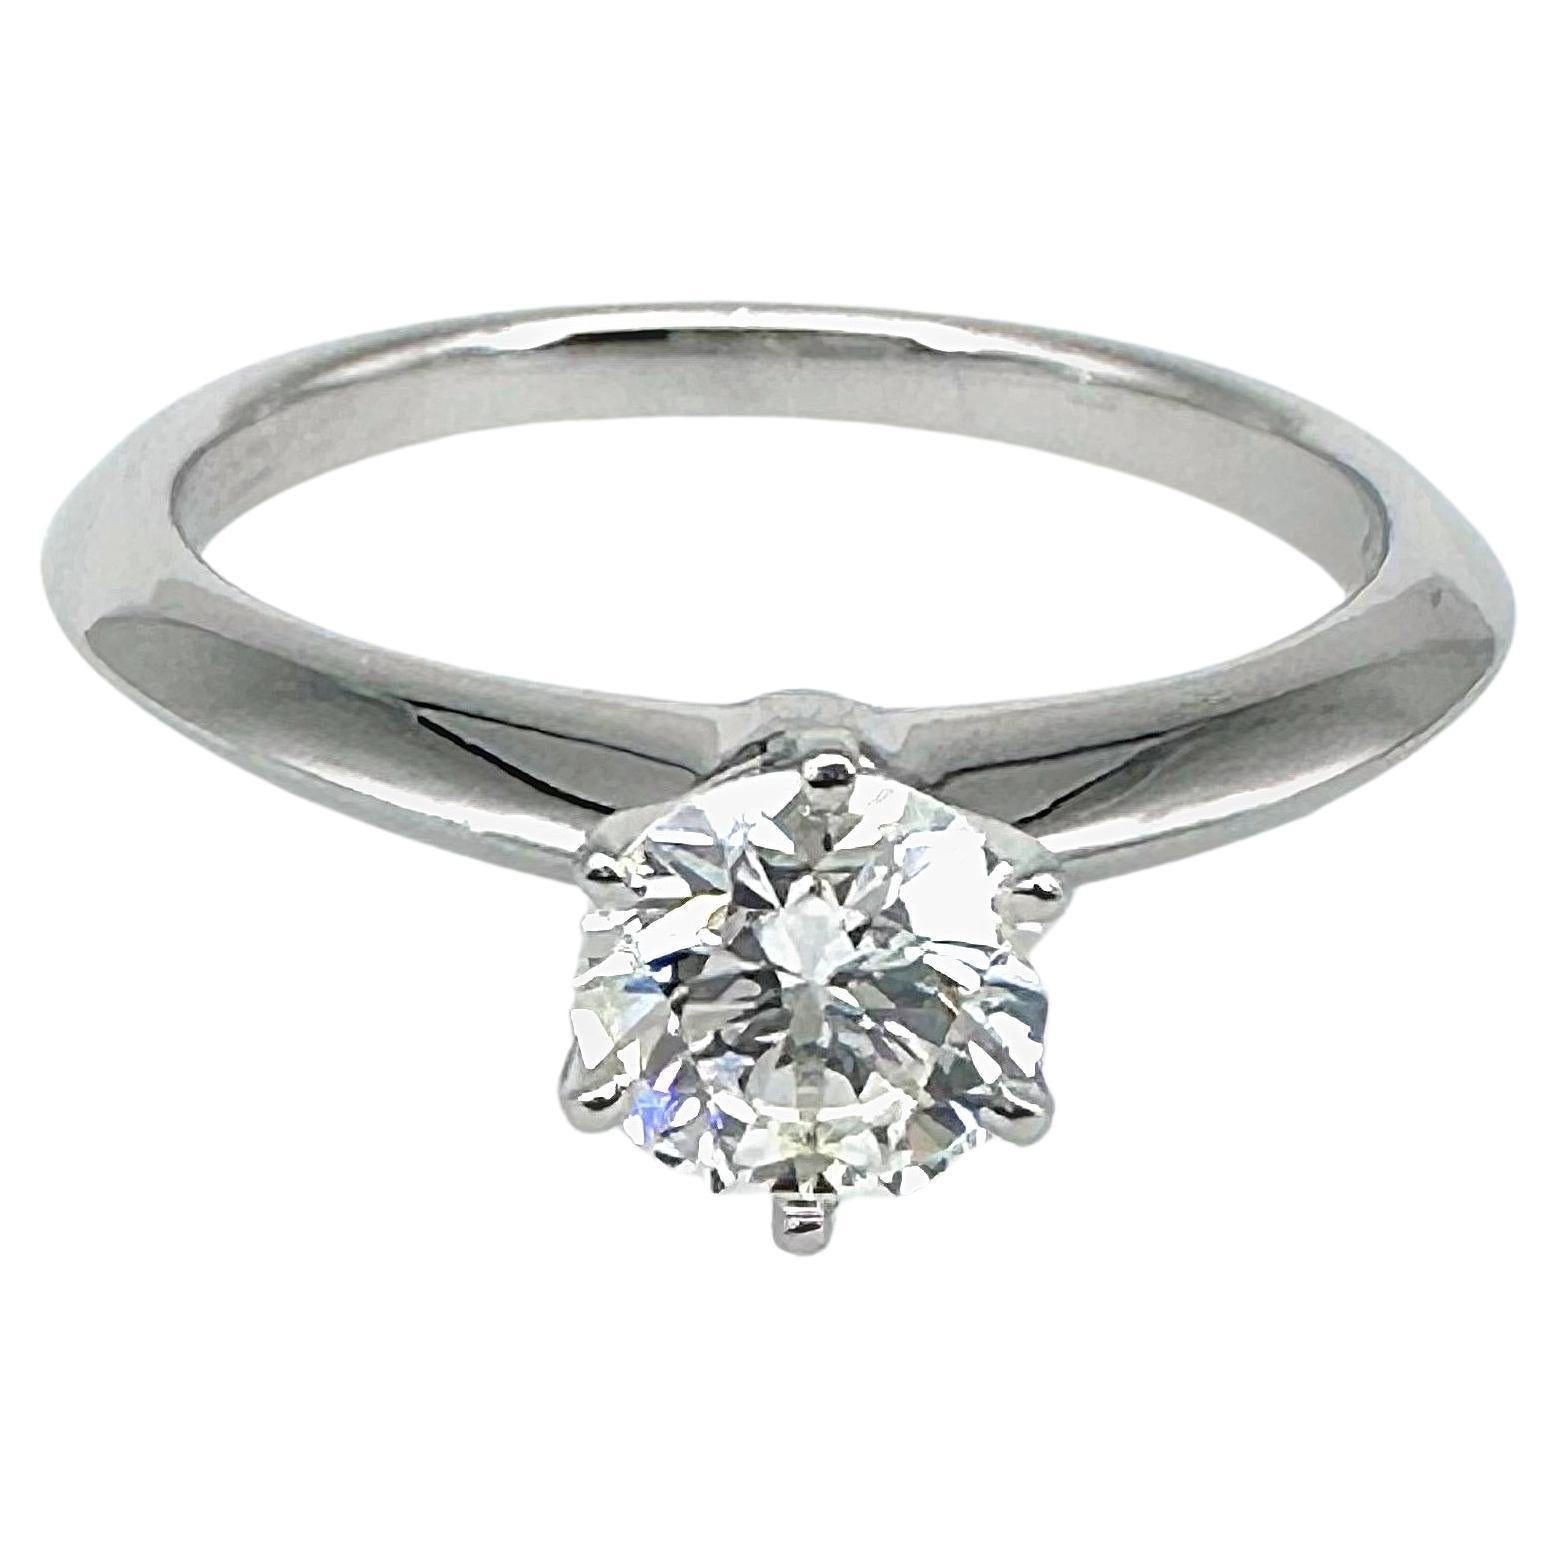 Tiffany & Co Round Diamond 0.61cts I VS1 Solitaire Platinum Engagement Ring